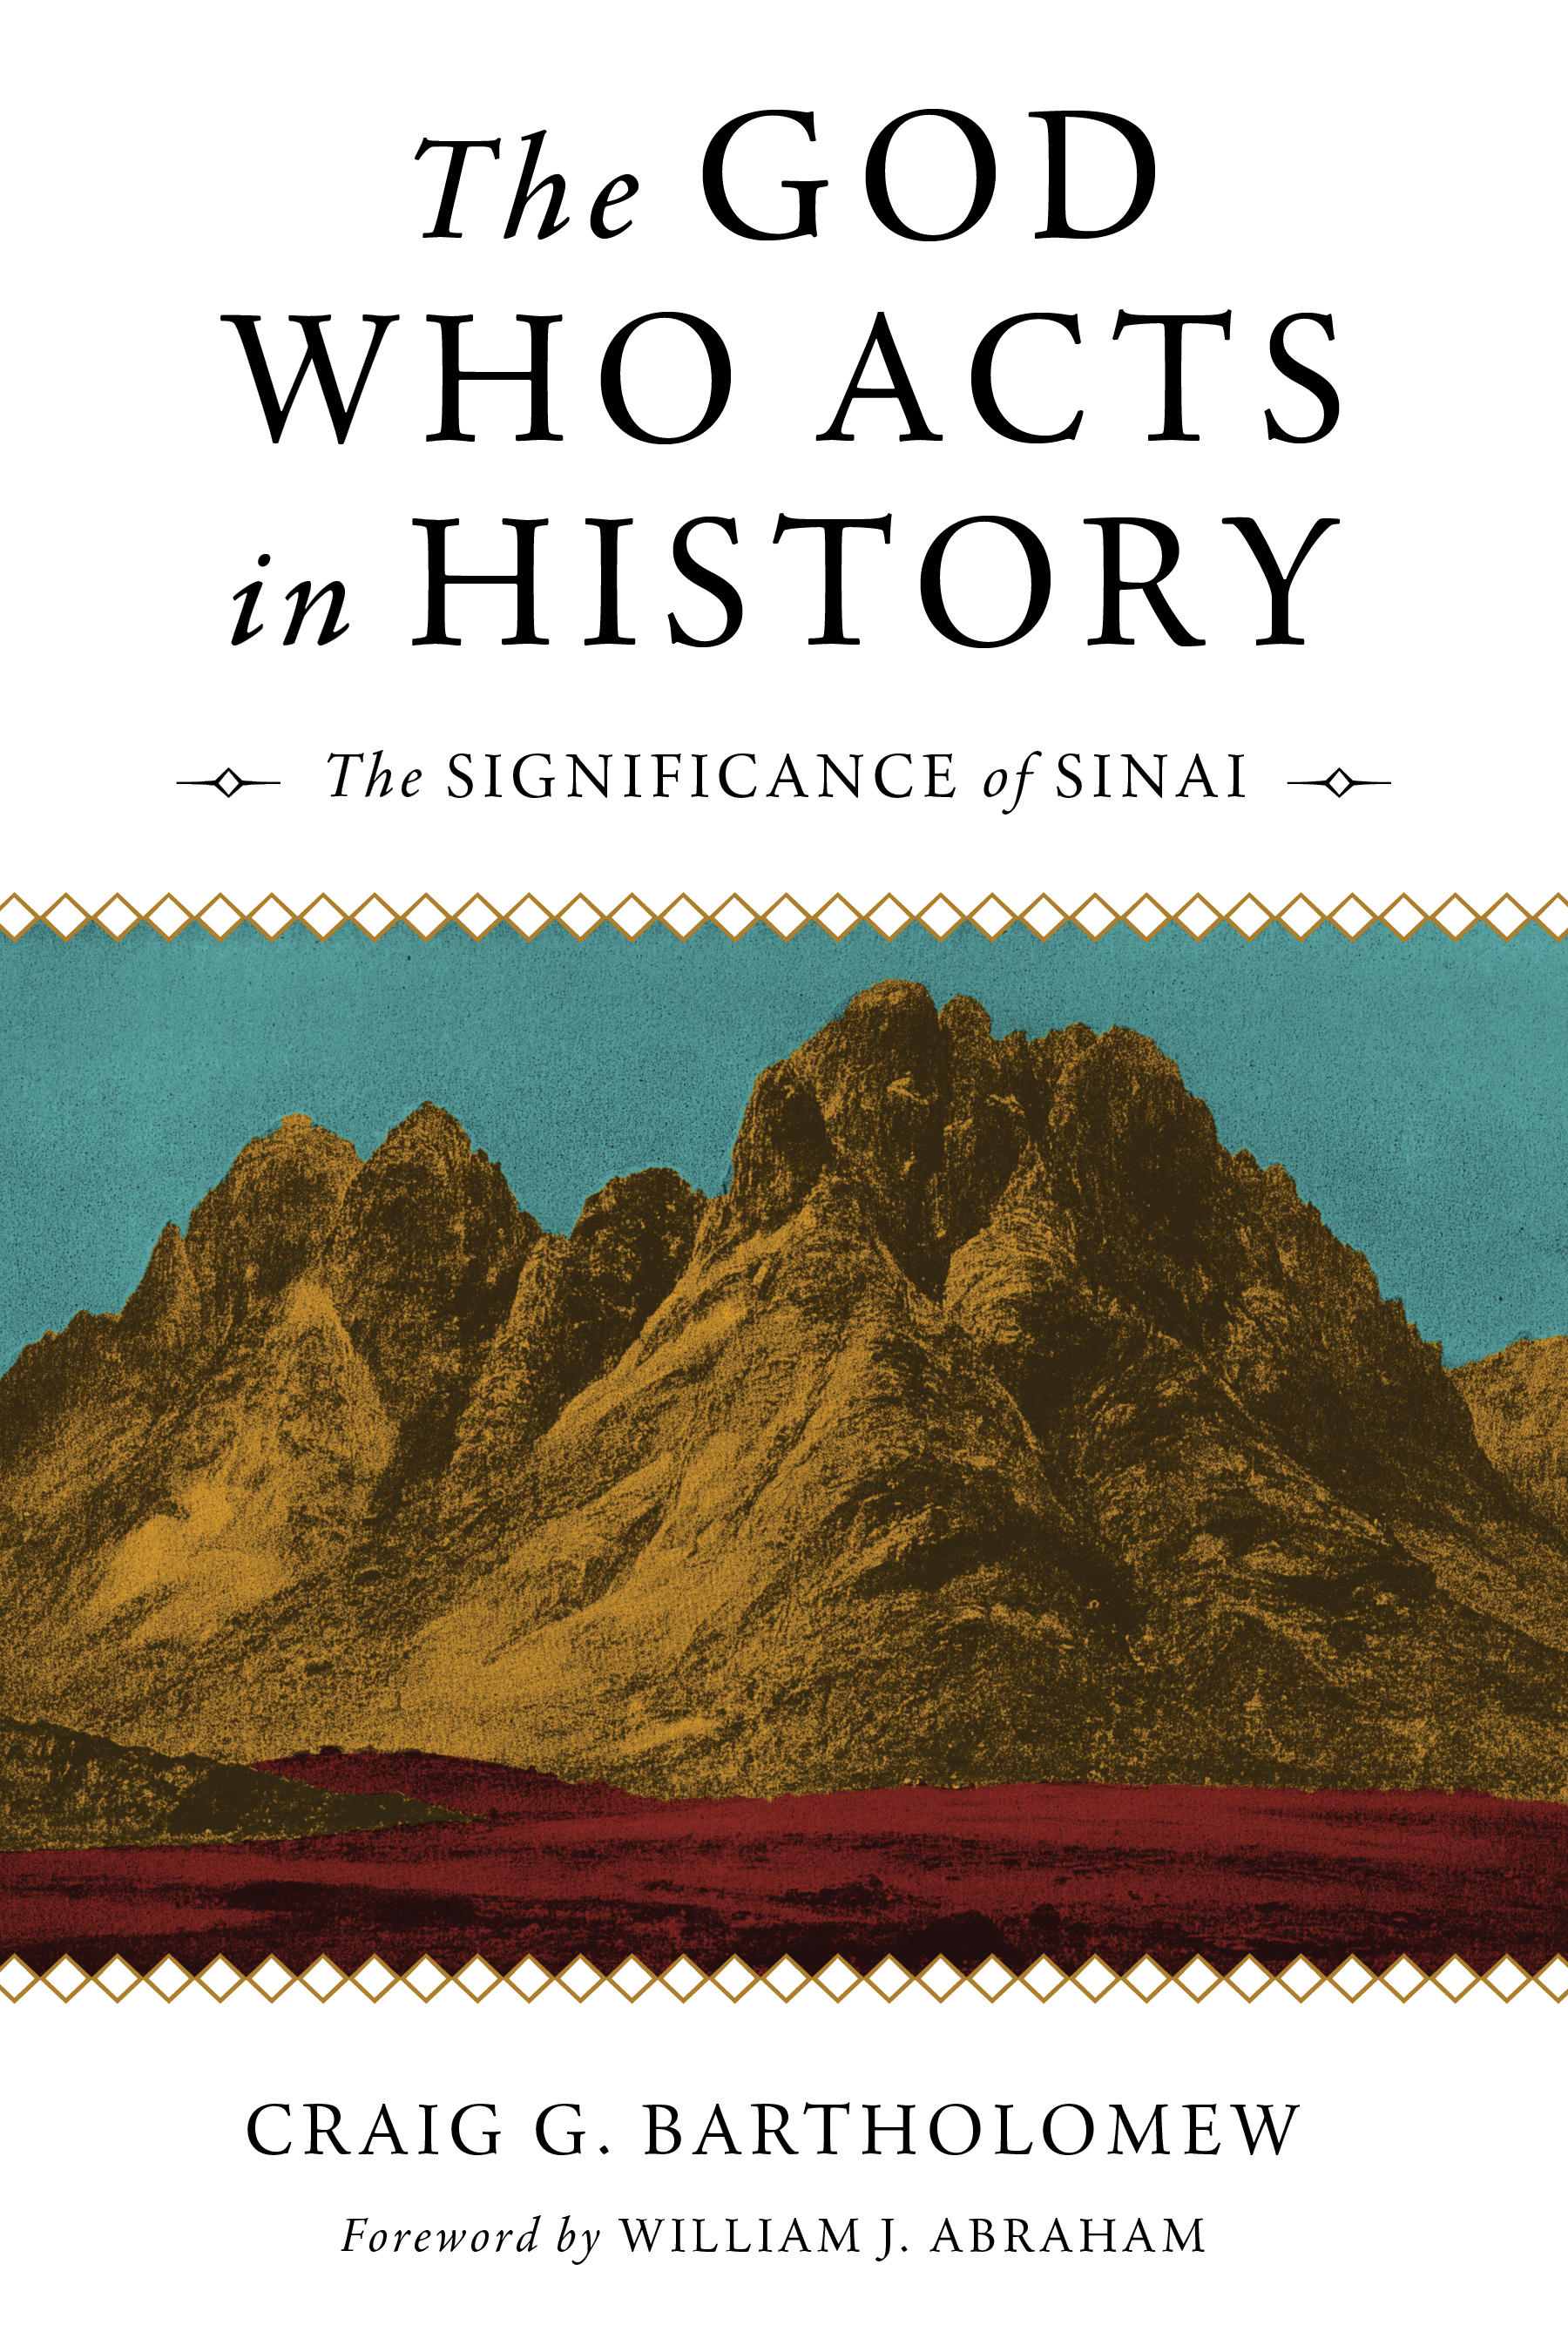 The God Who Acts in History: The Significance of Sinai